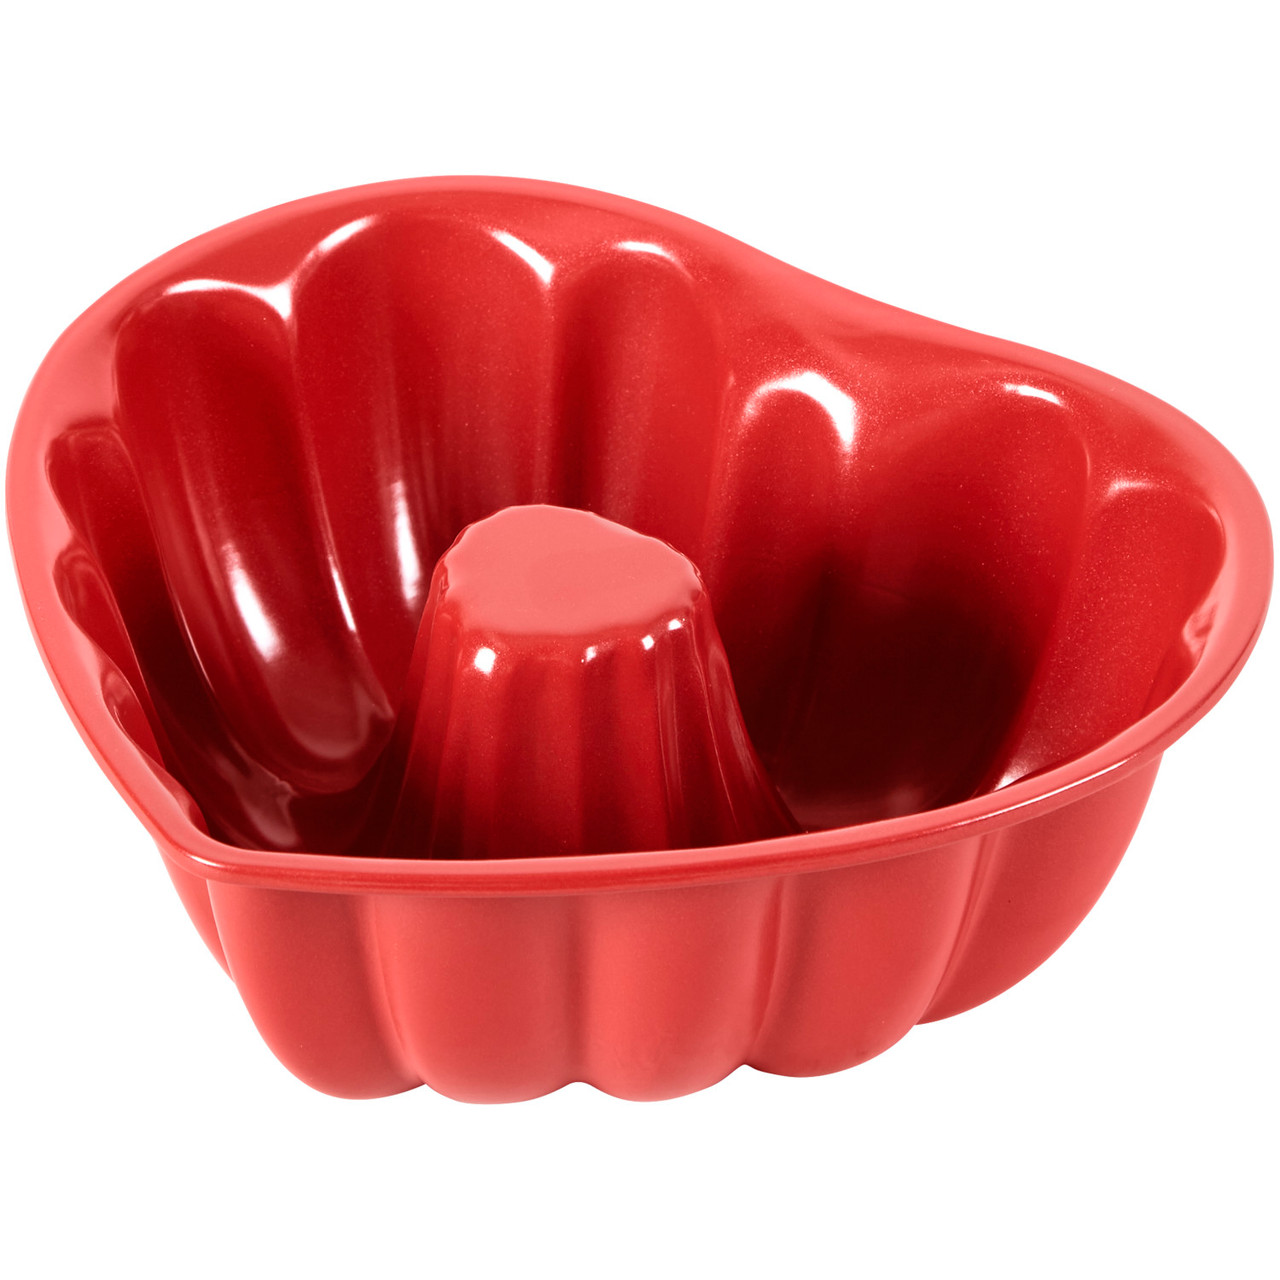 Wilton Treats Made Simple Non-Stick Fluted Tube Pan - 6 in